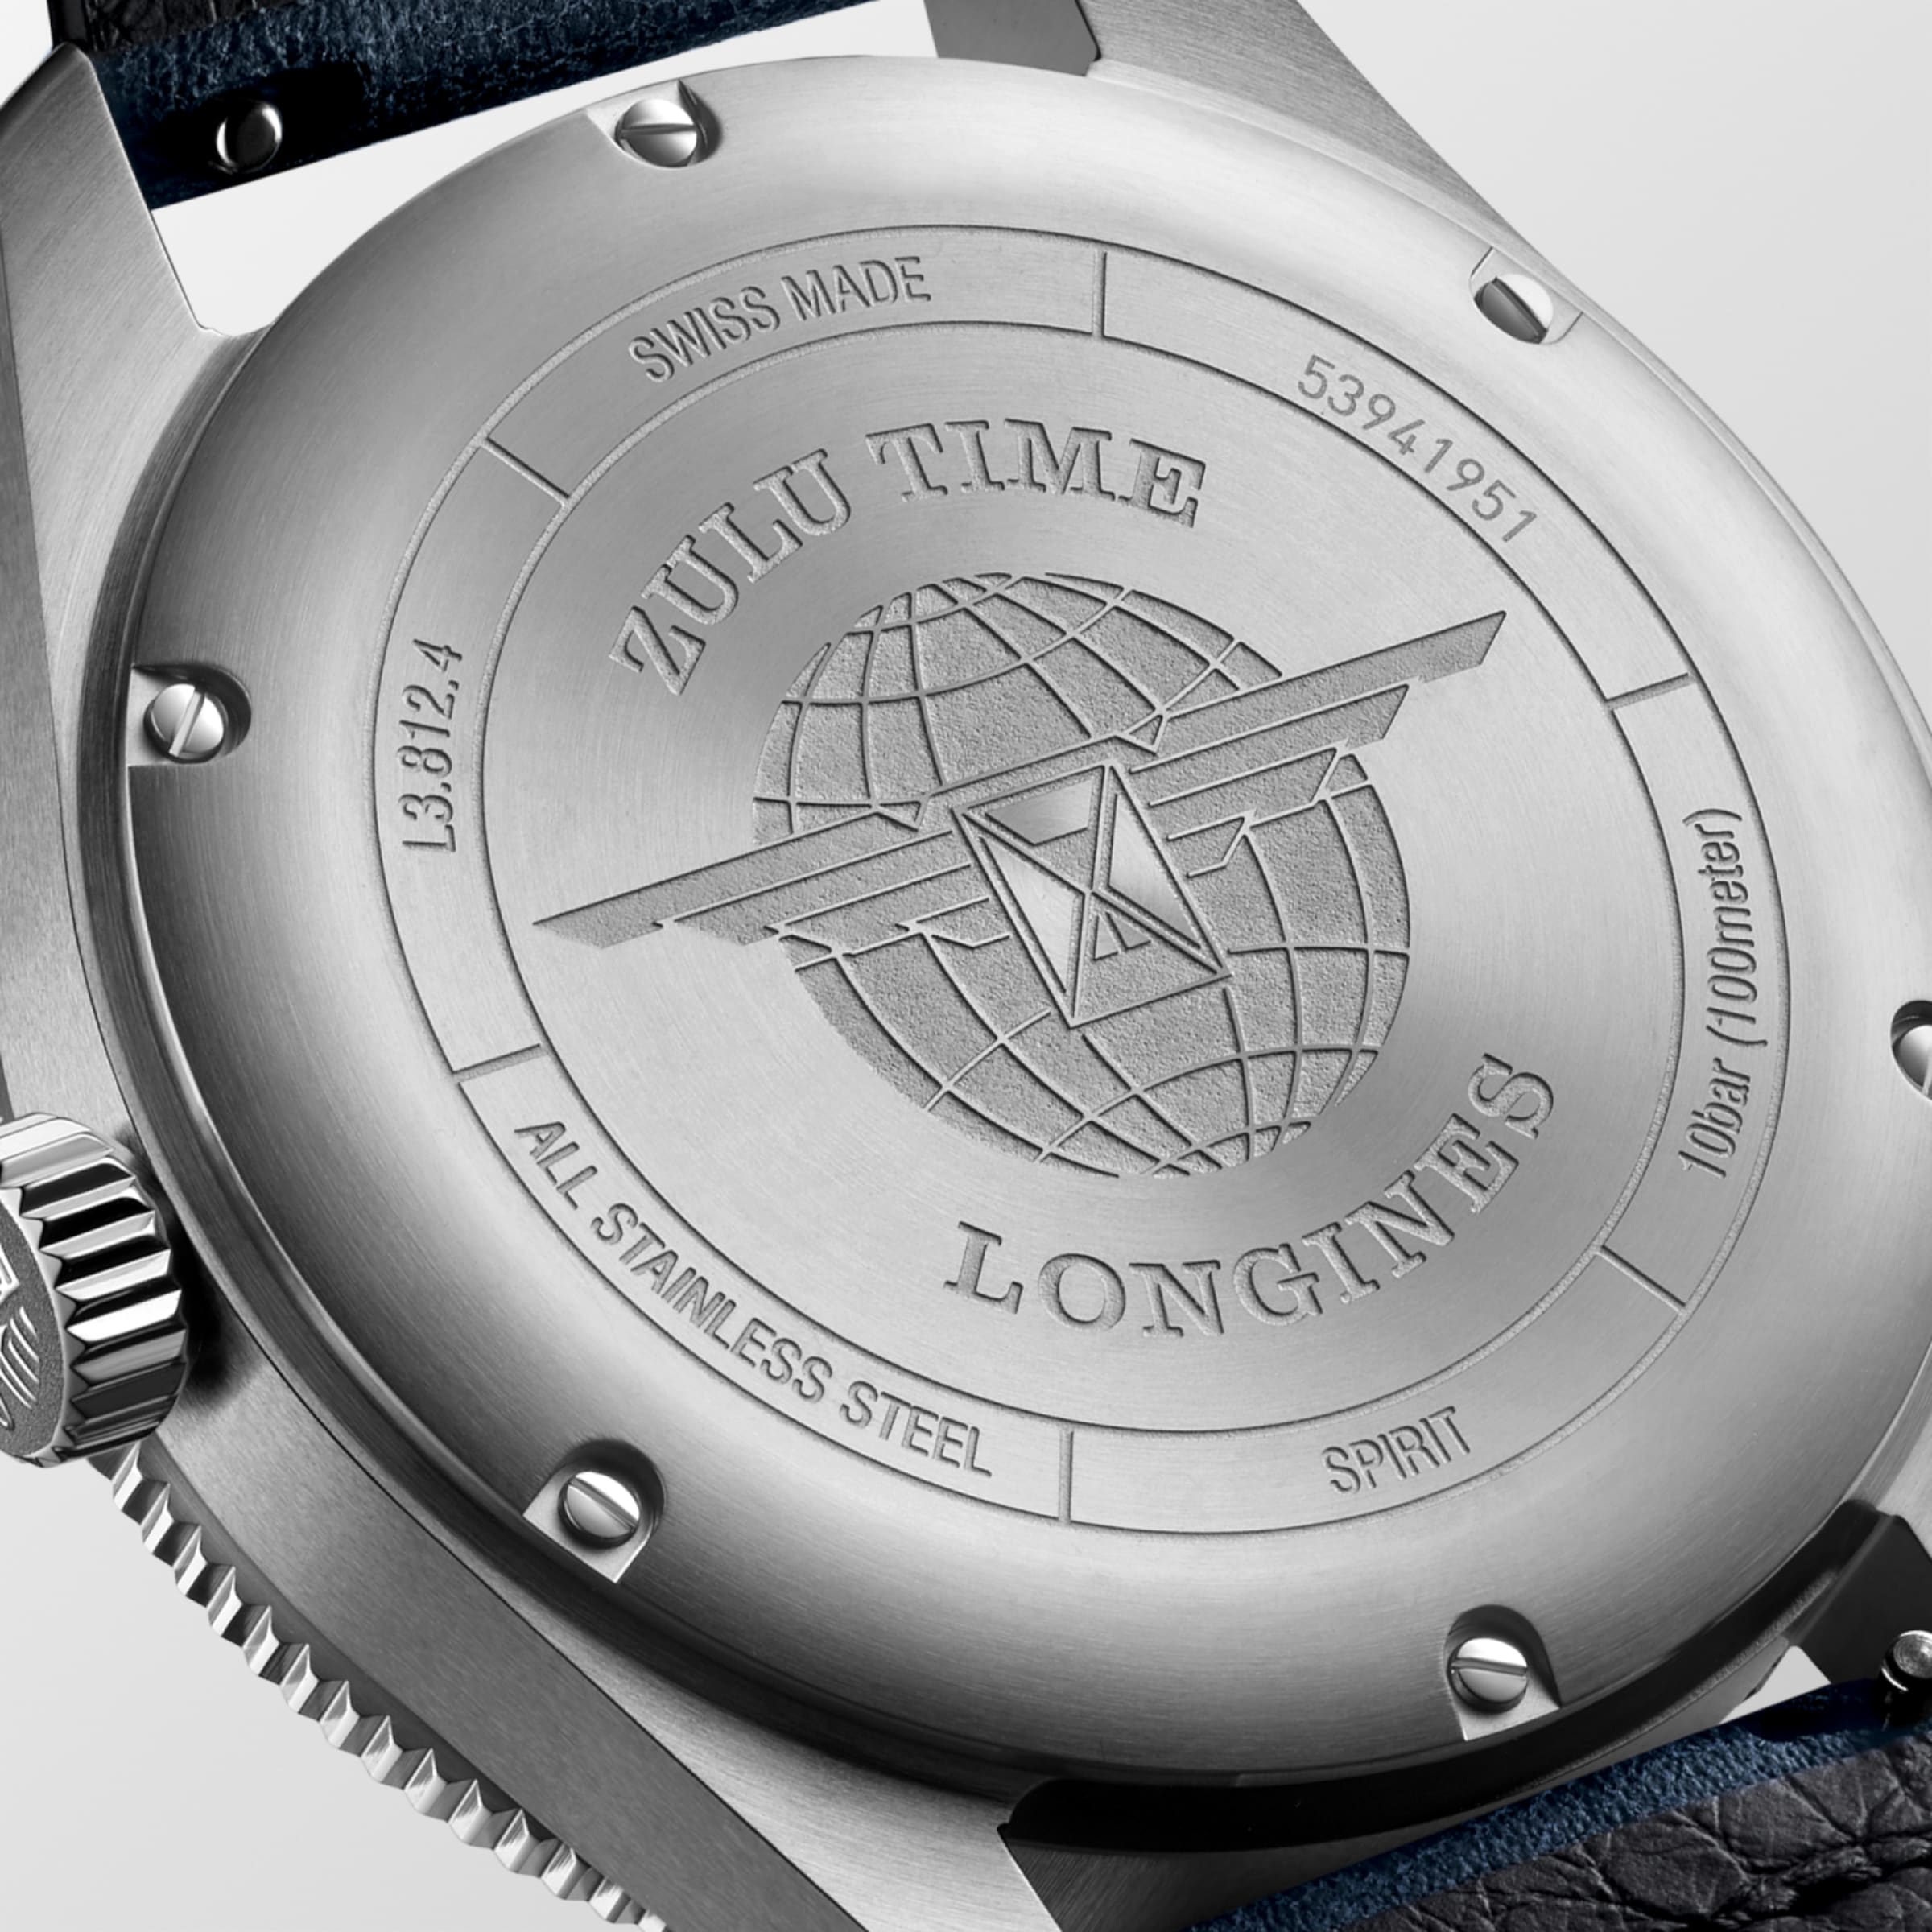 Longines SPIRIT Automatic Stainless steel and ceramic bezel Watch - L3.812.4.93.2